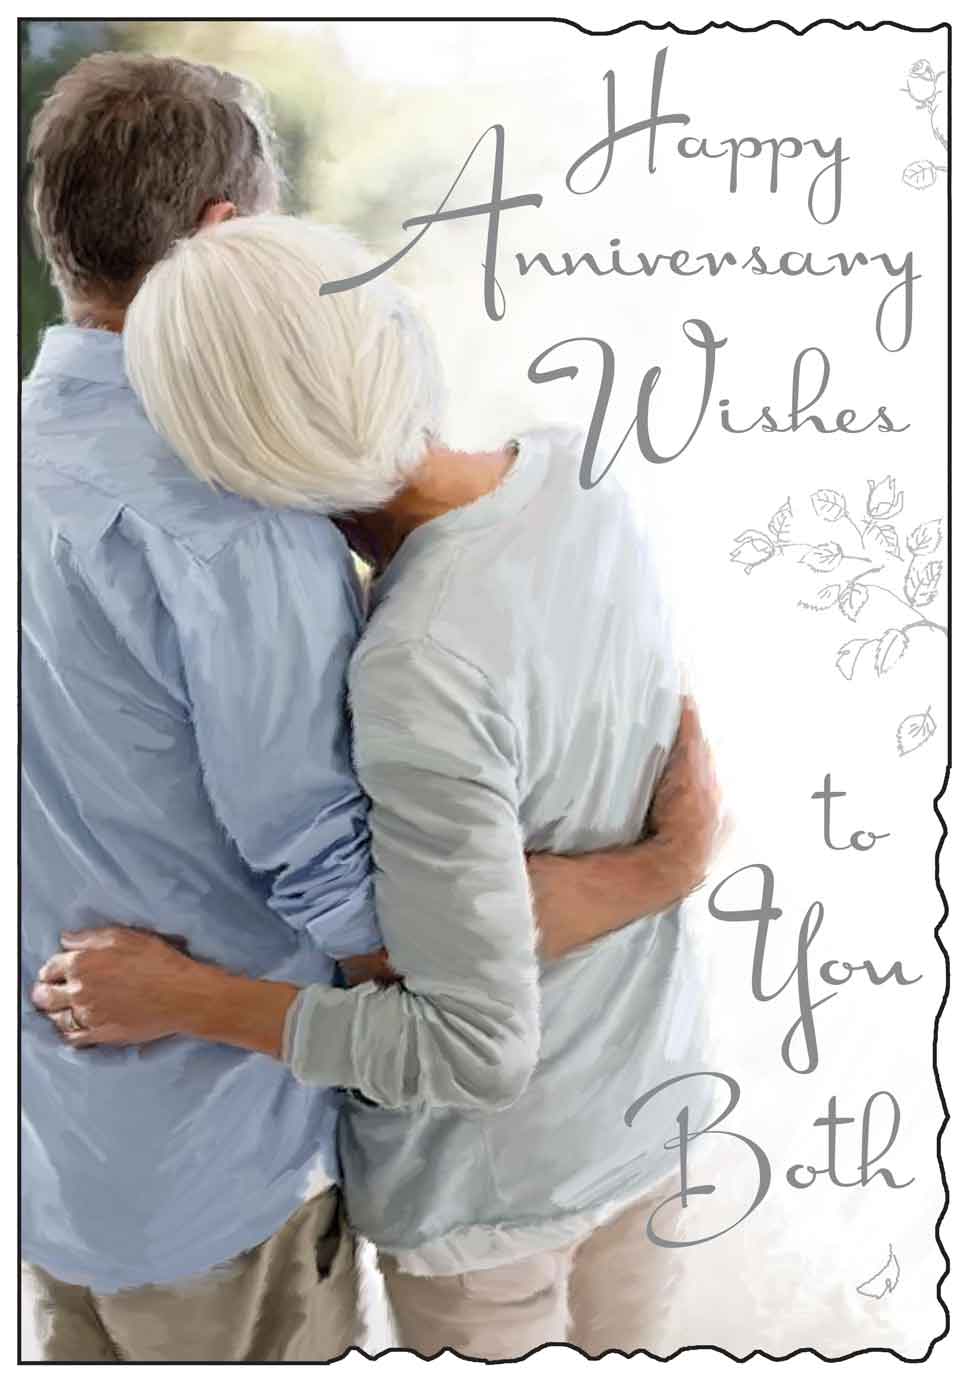 General Anniversary to Both of You Card